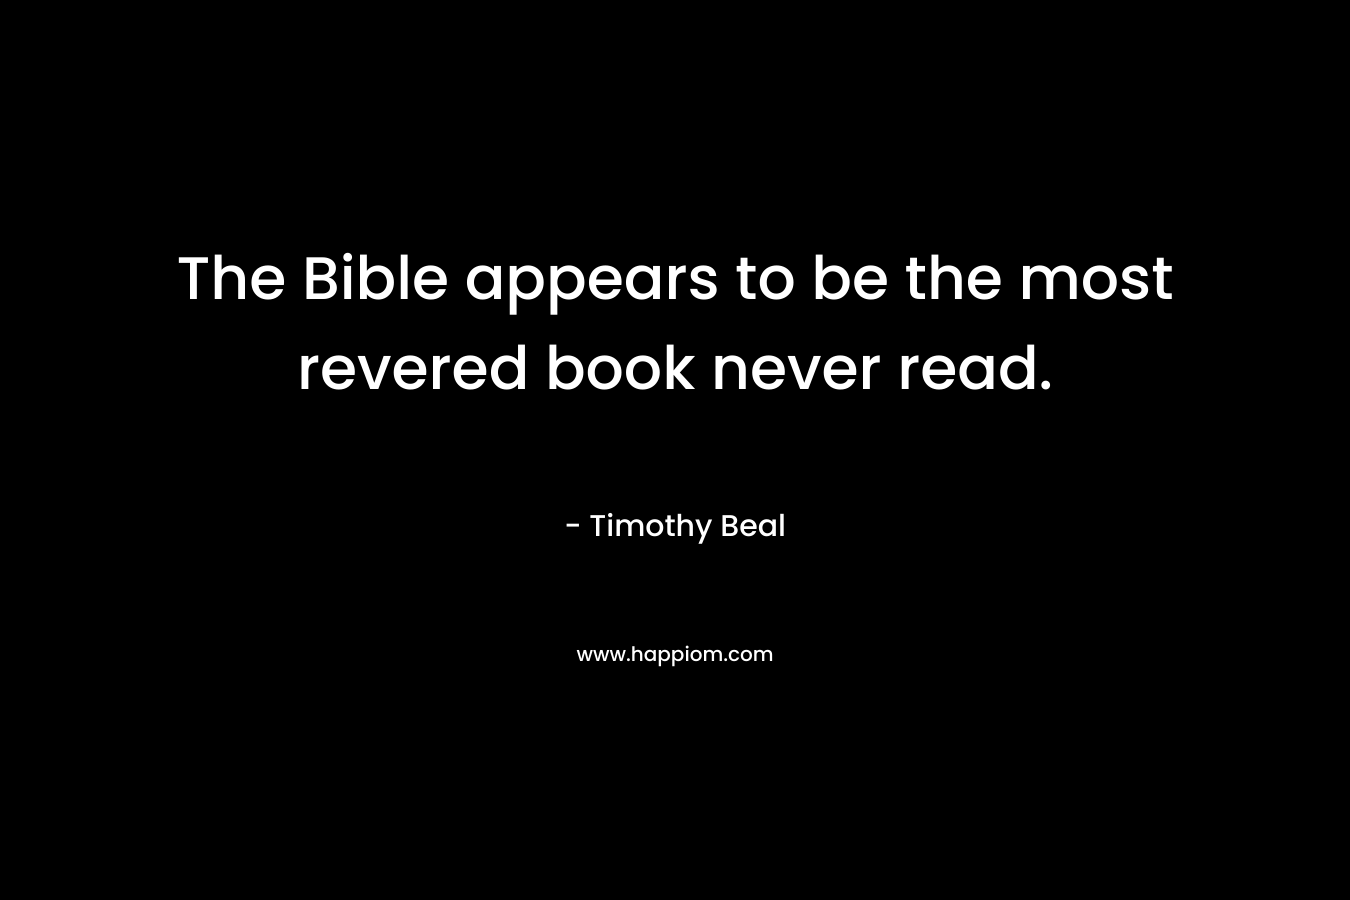 The Bible appears to be the most revered book never read.